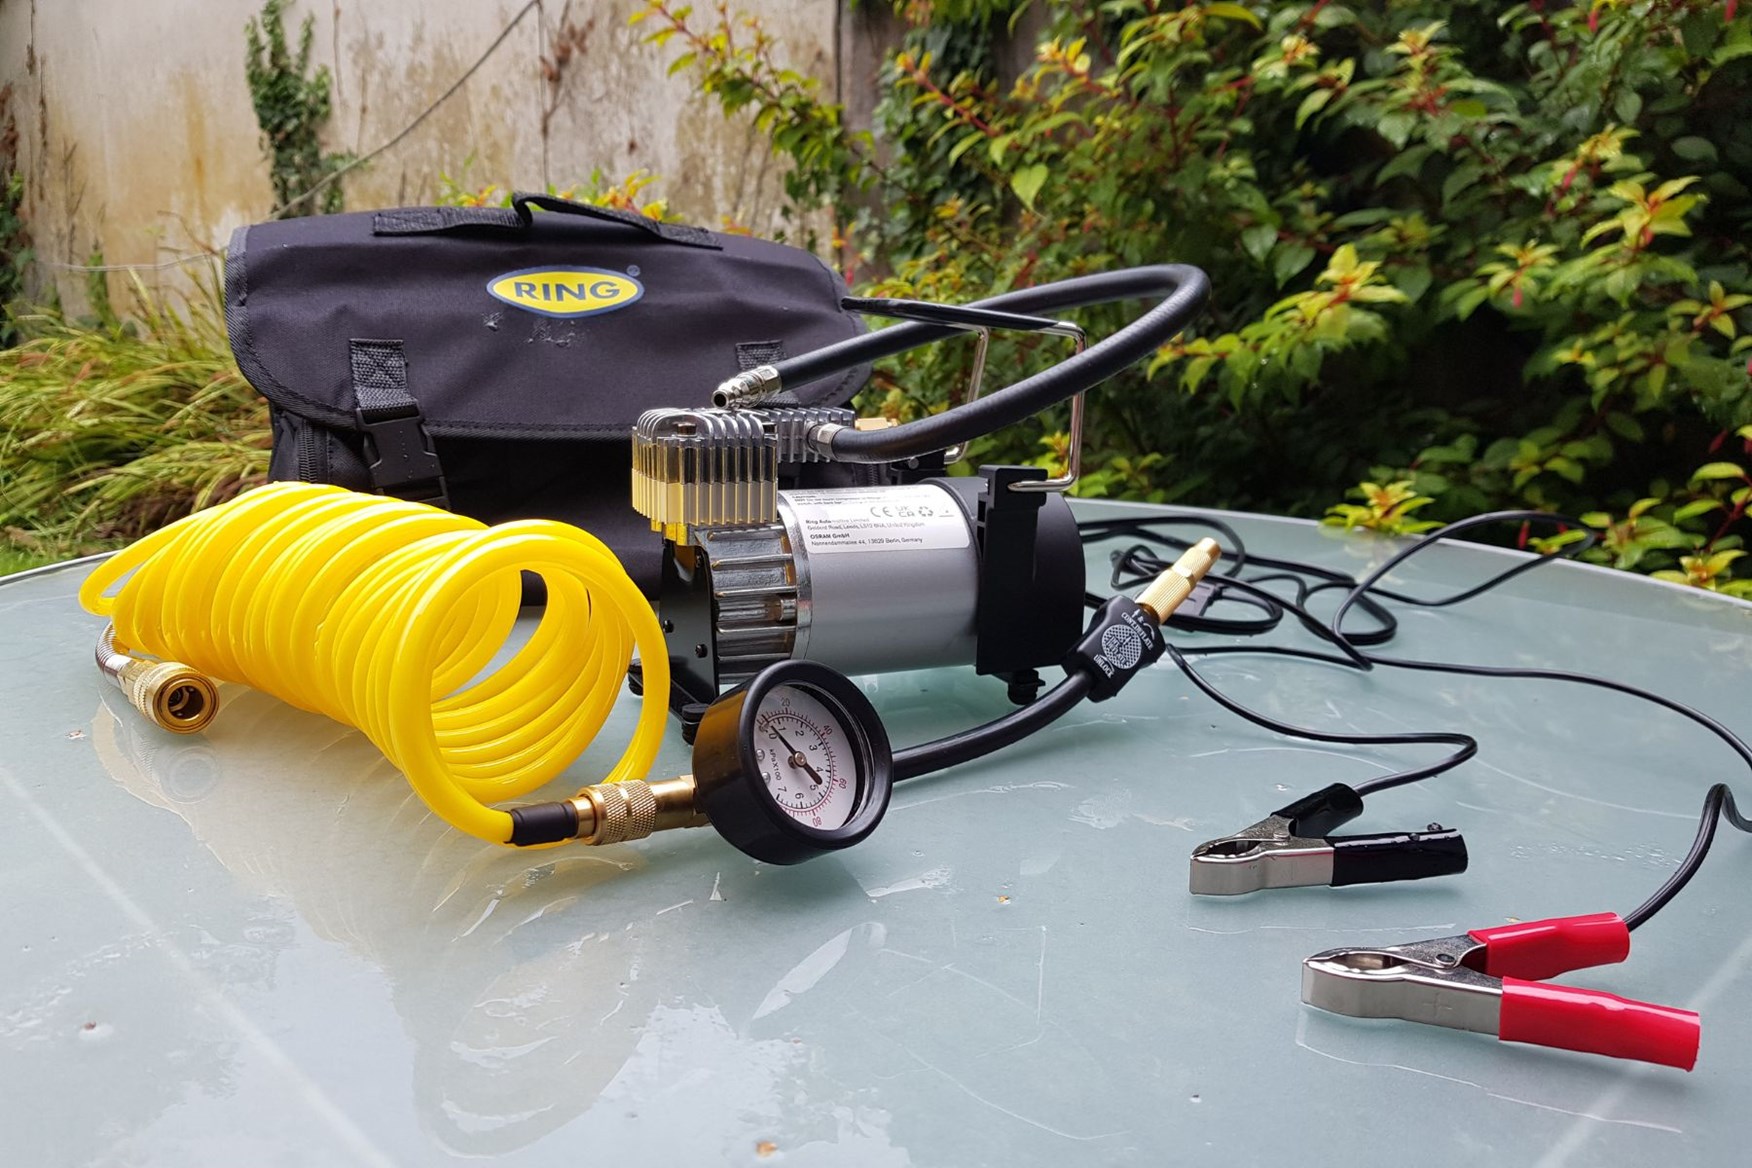 The best tyre inflator compressors